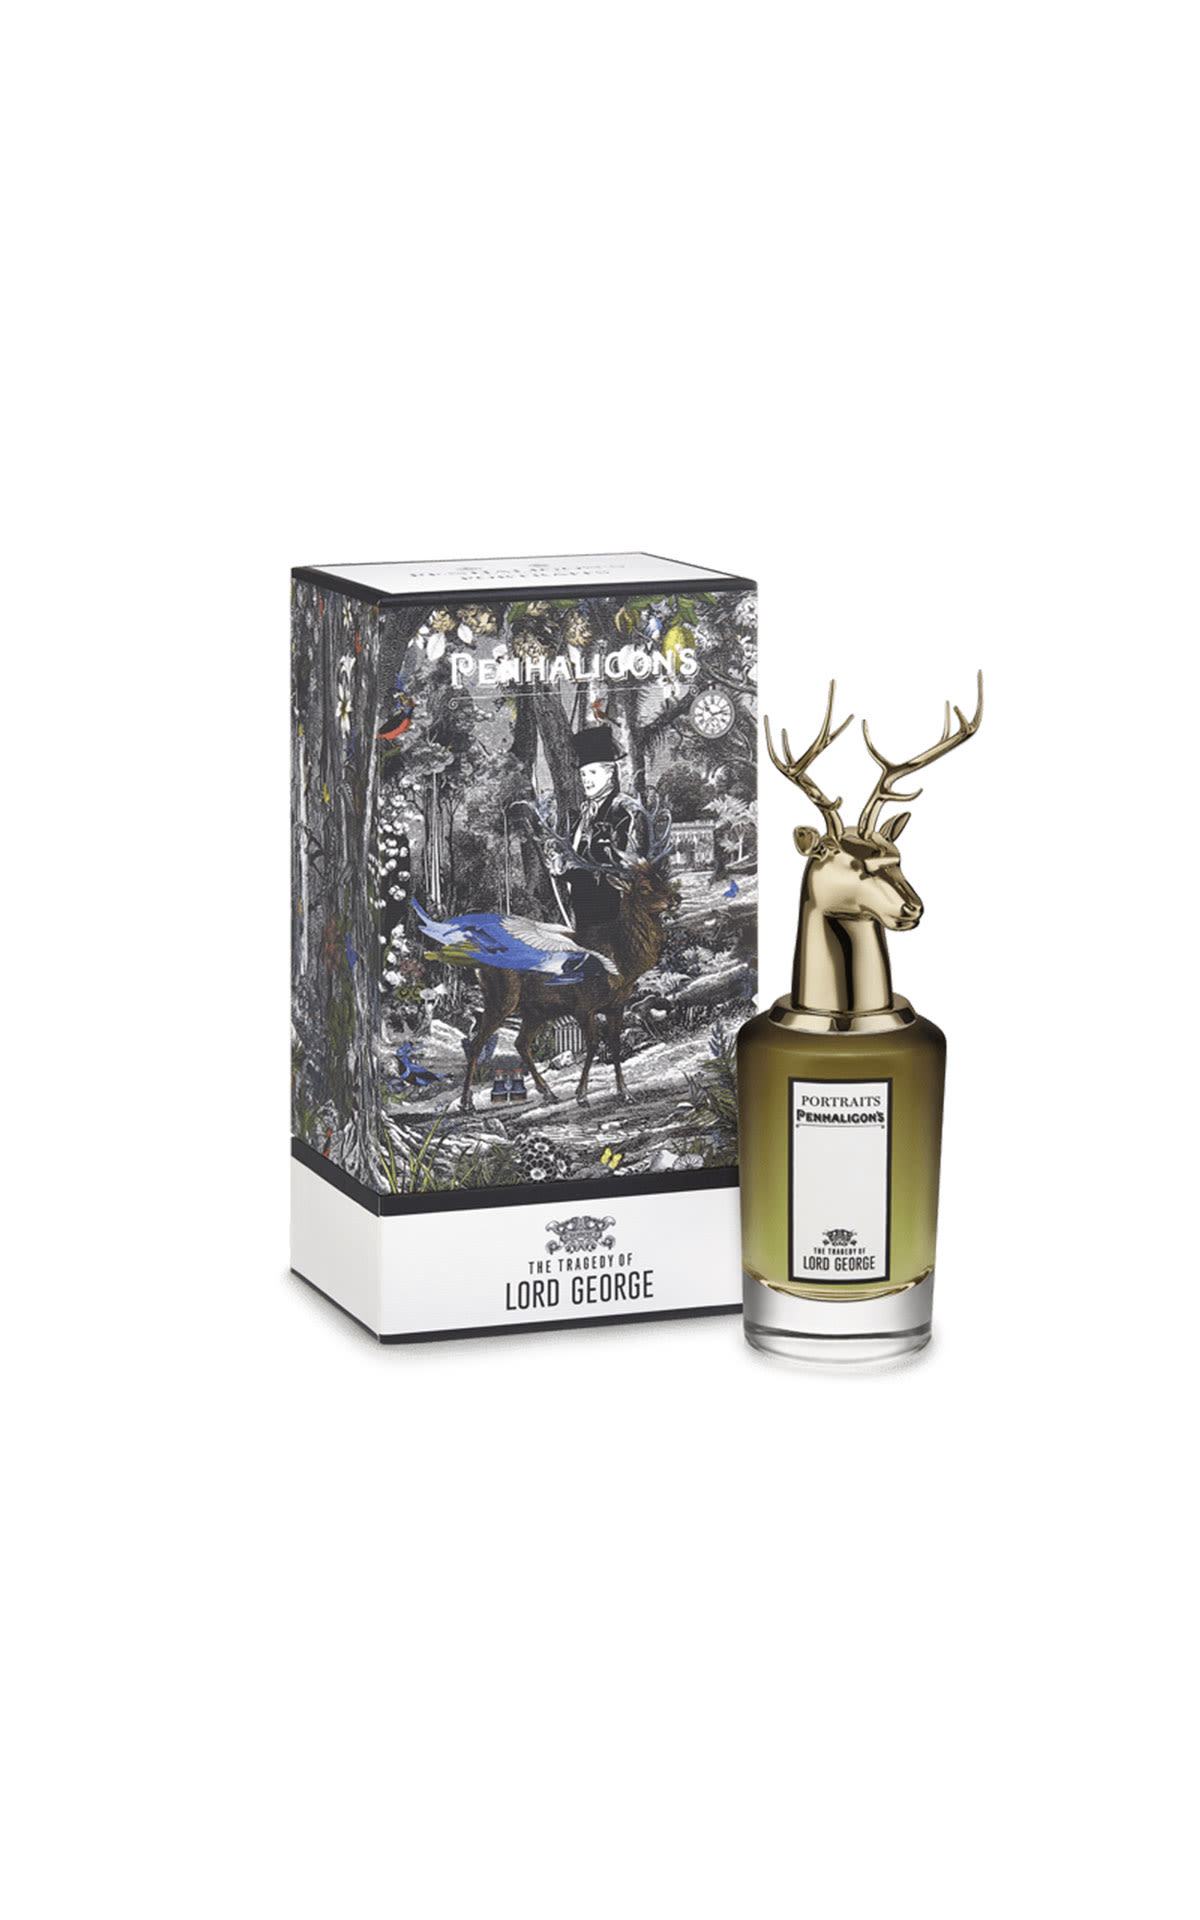 Penhaligons Portraits collection Lord George 75ml from Bicester Village